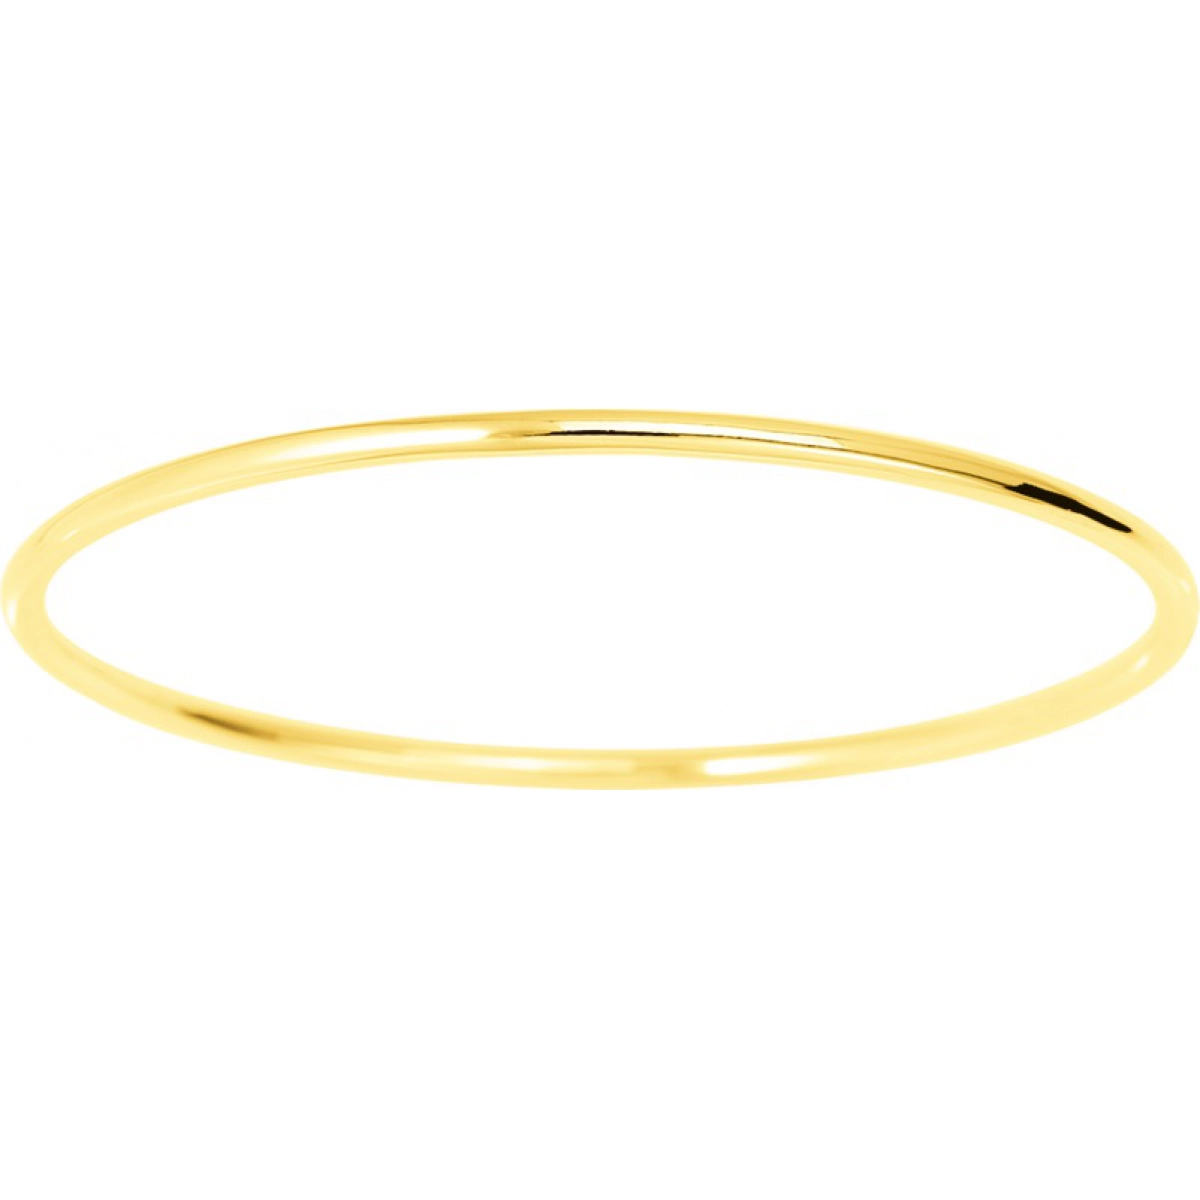 Bangle round wire solid 18K YG - Size: 60  Lua Blanca  358.135.60